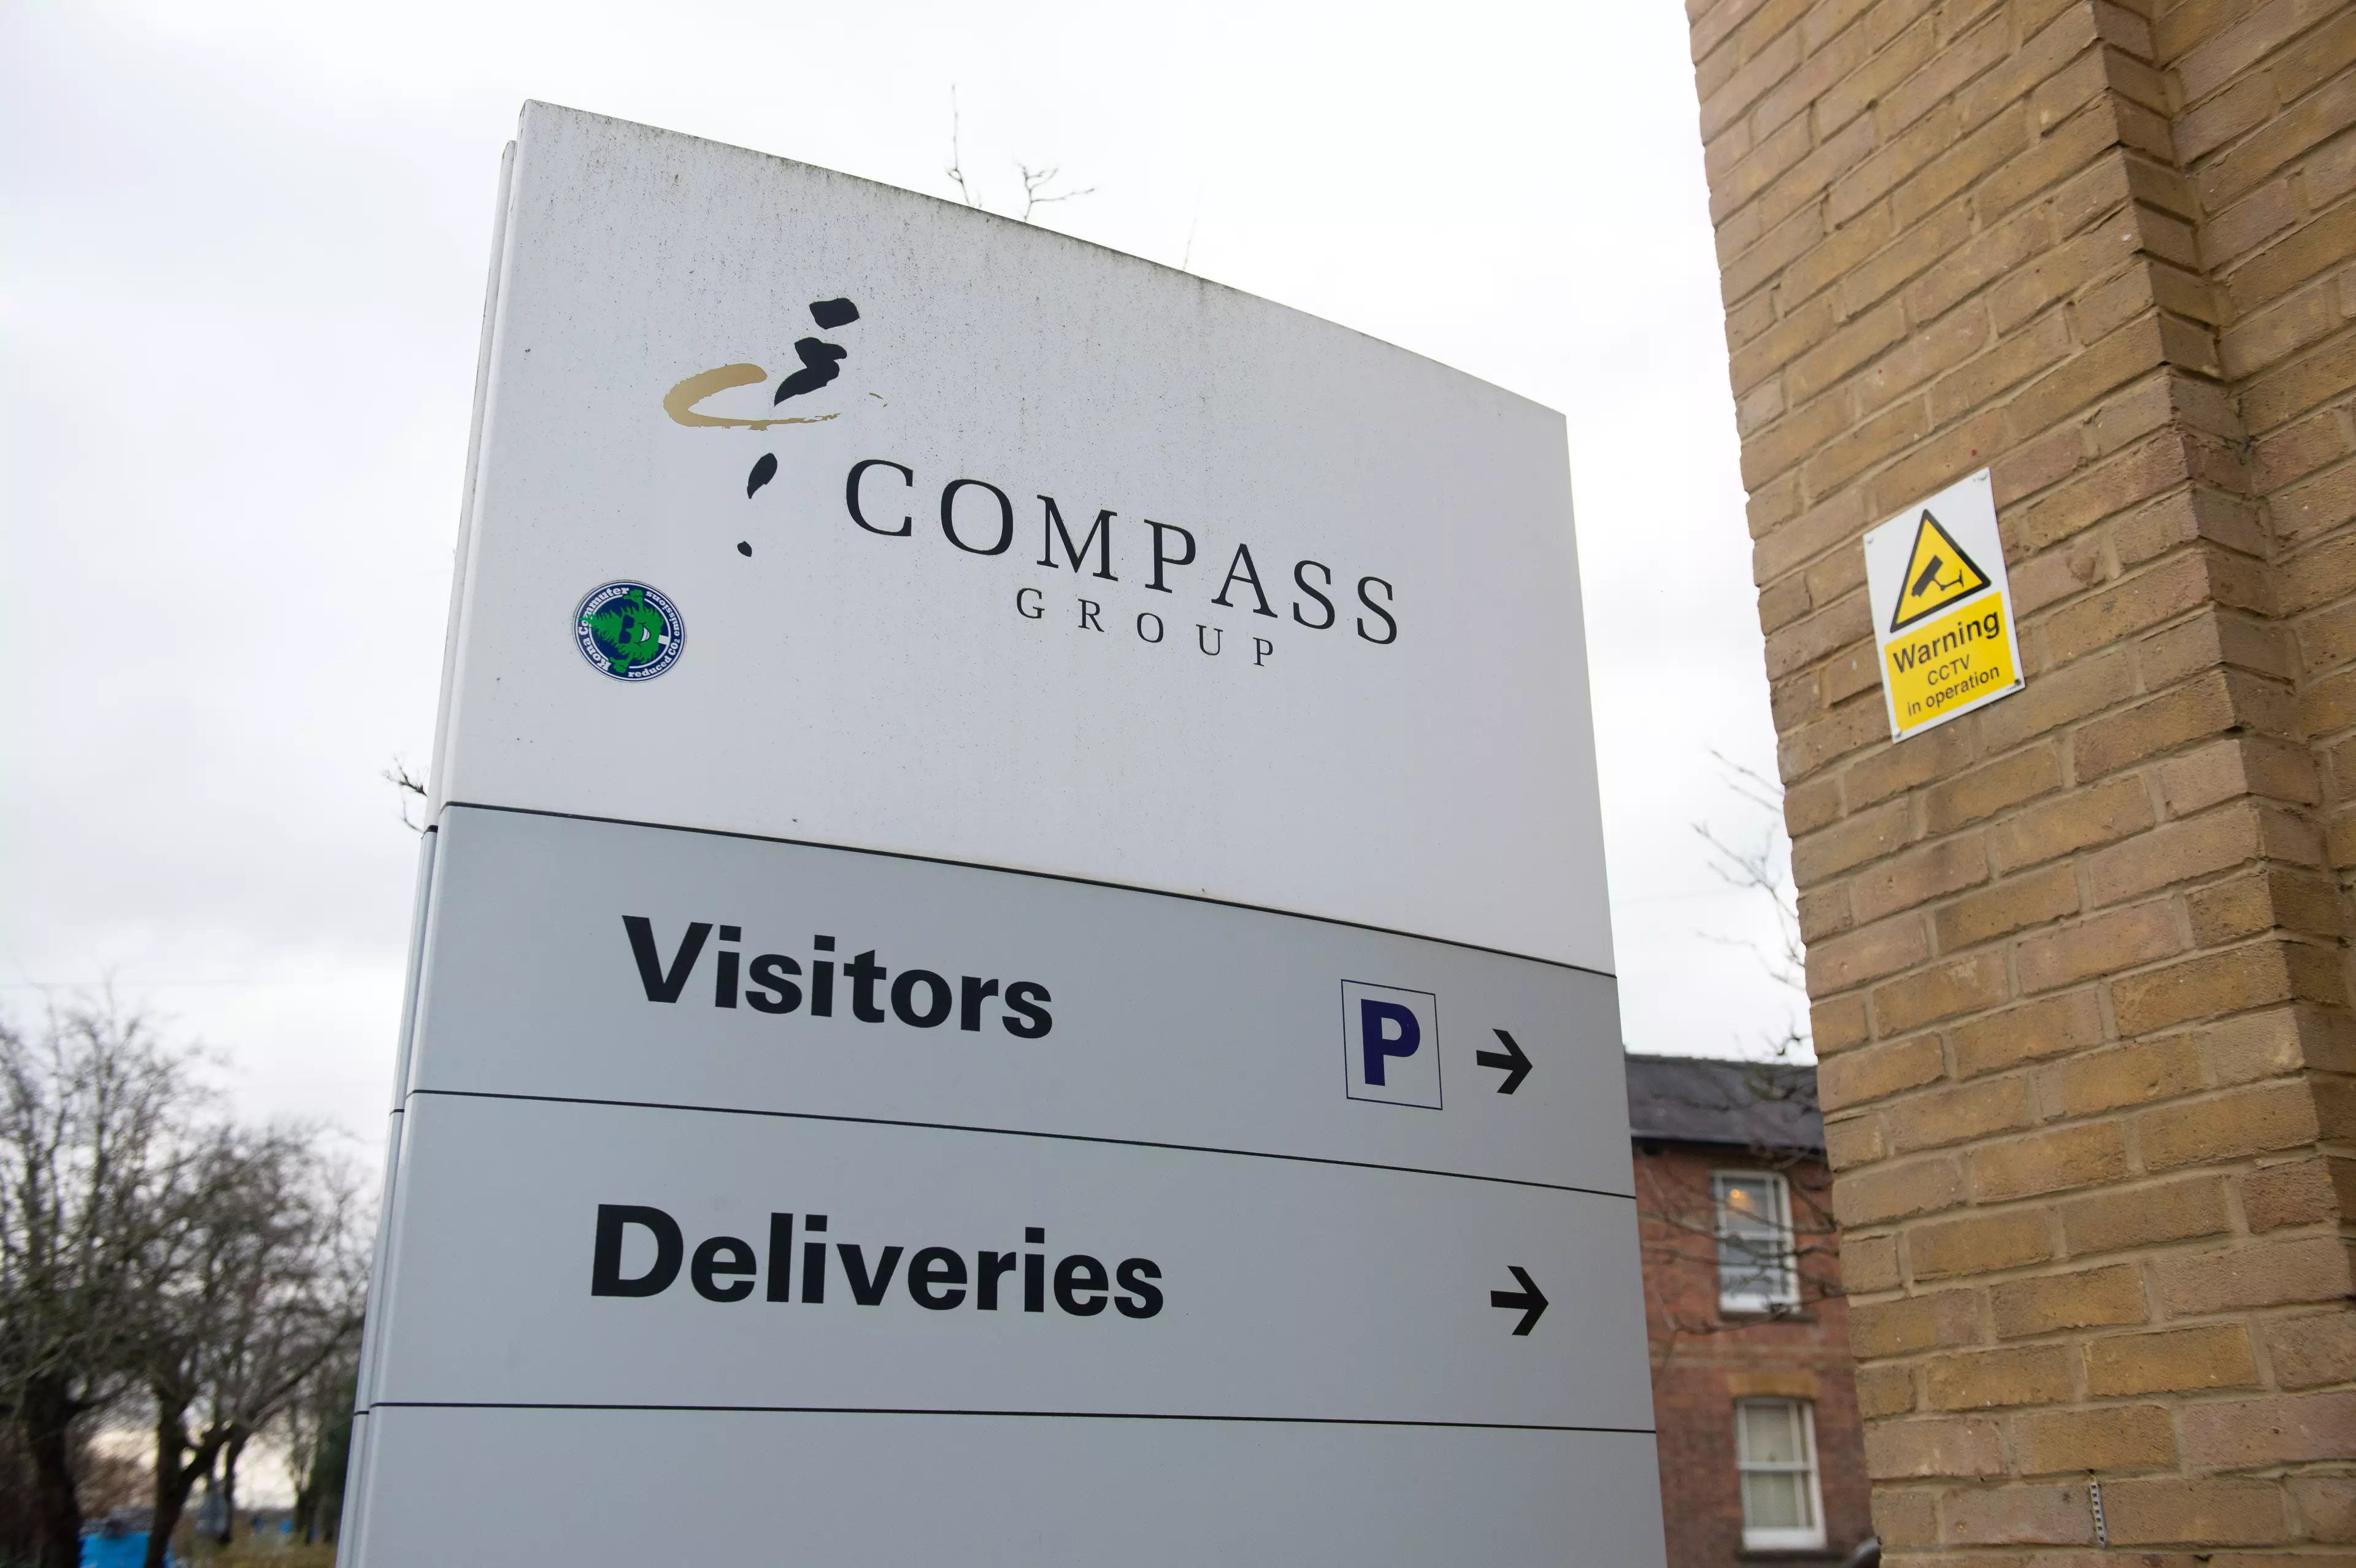 Chartwells, owned by Compass, has since apologised (